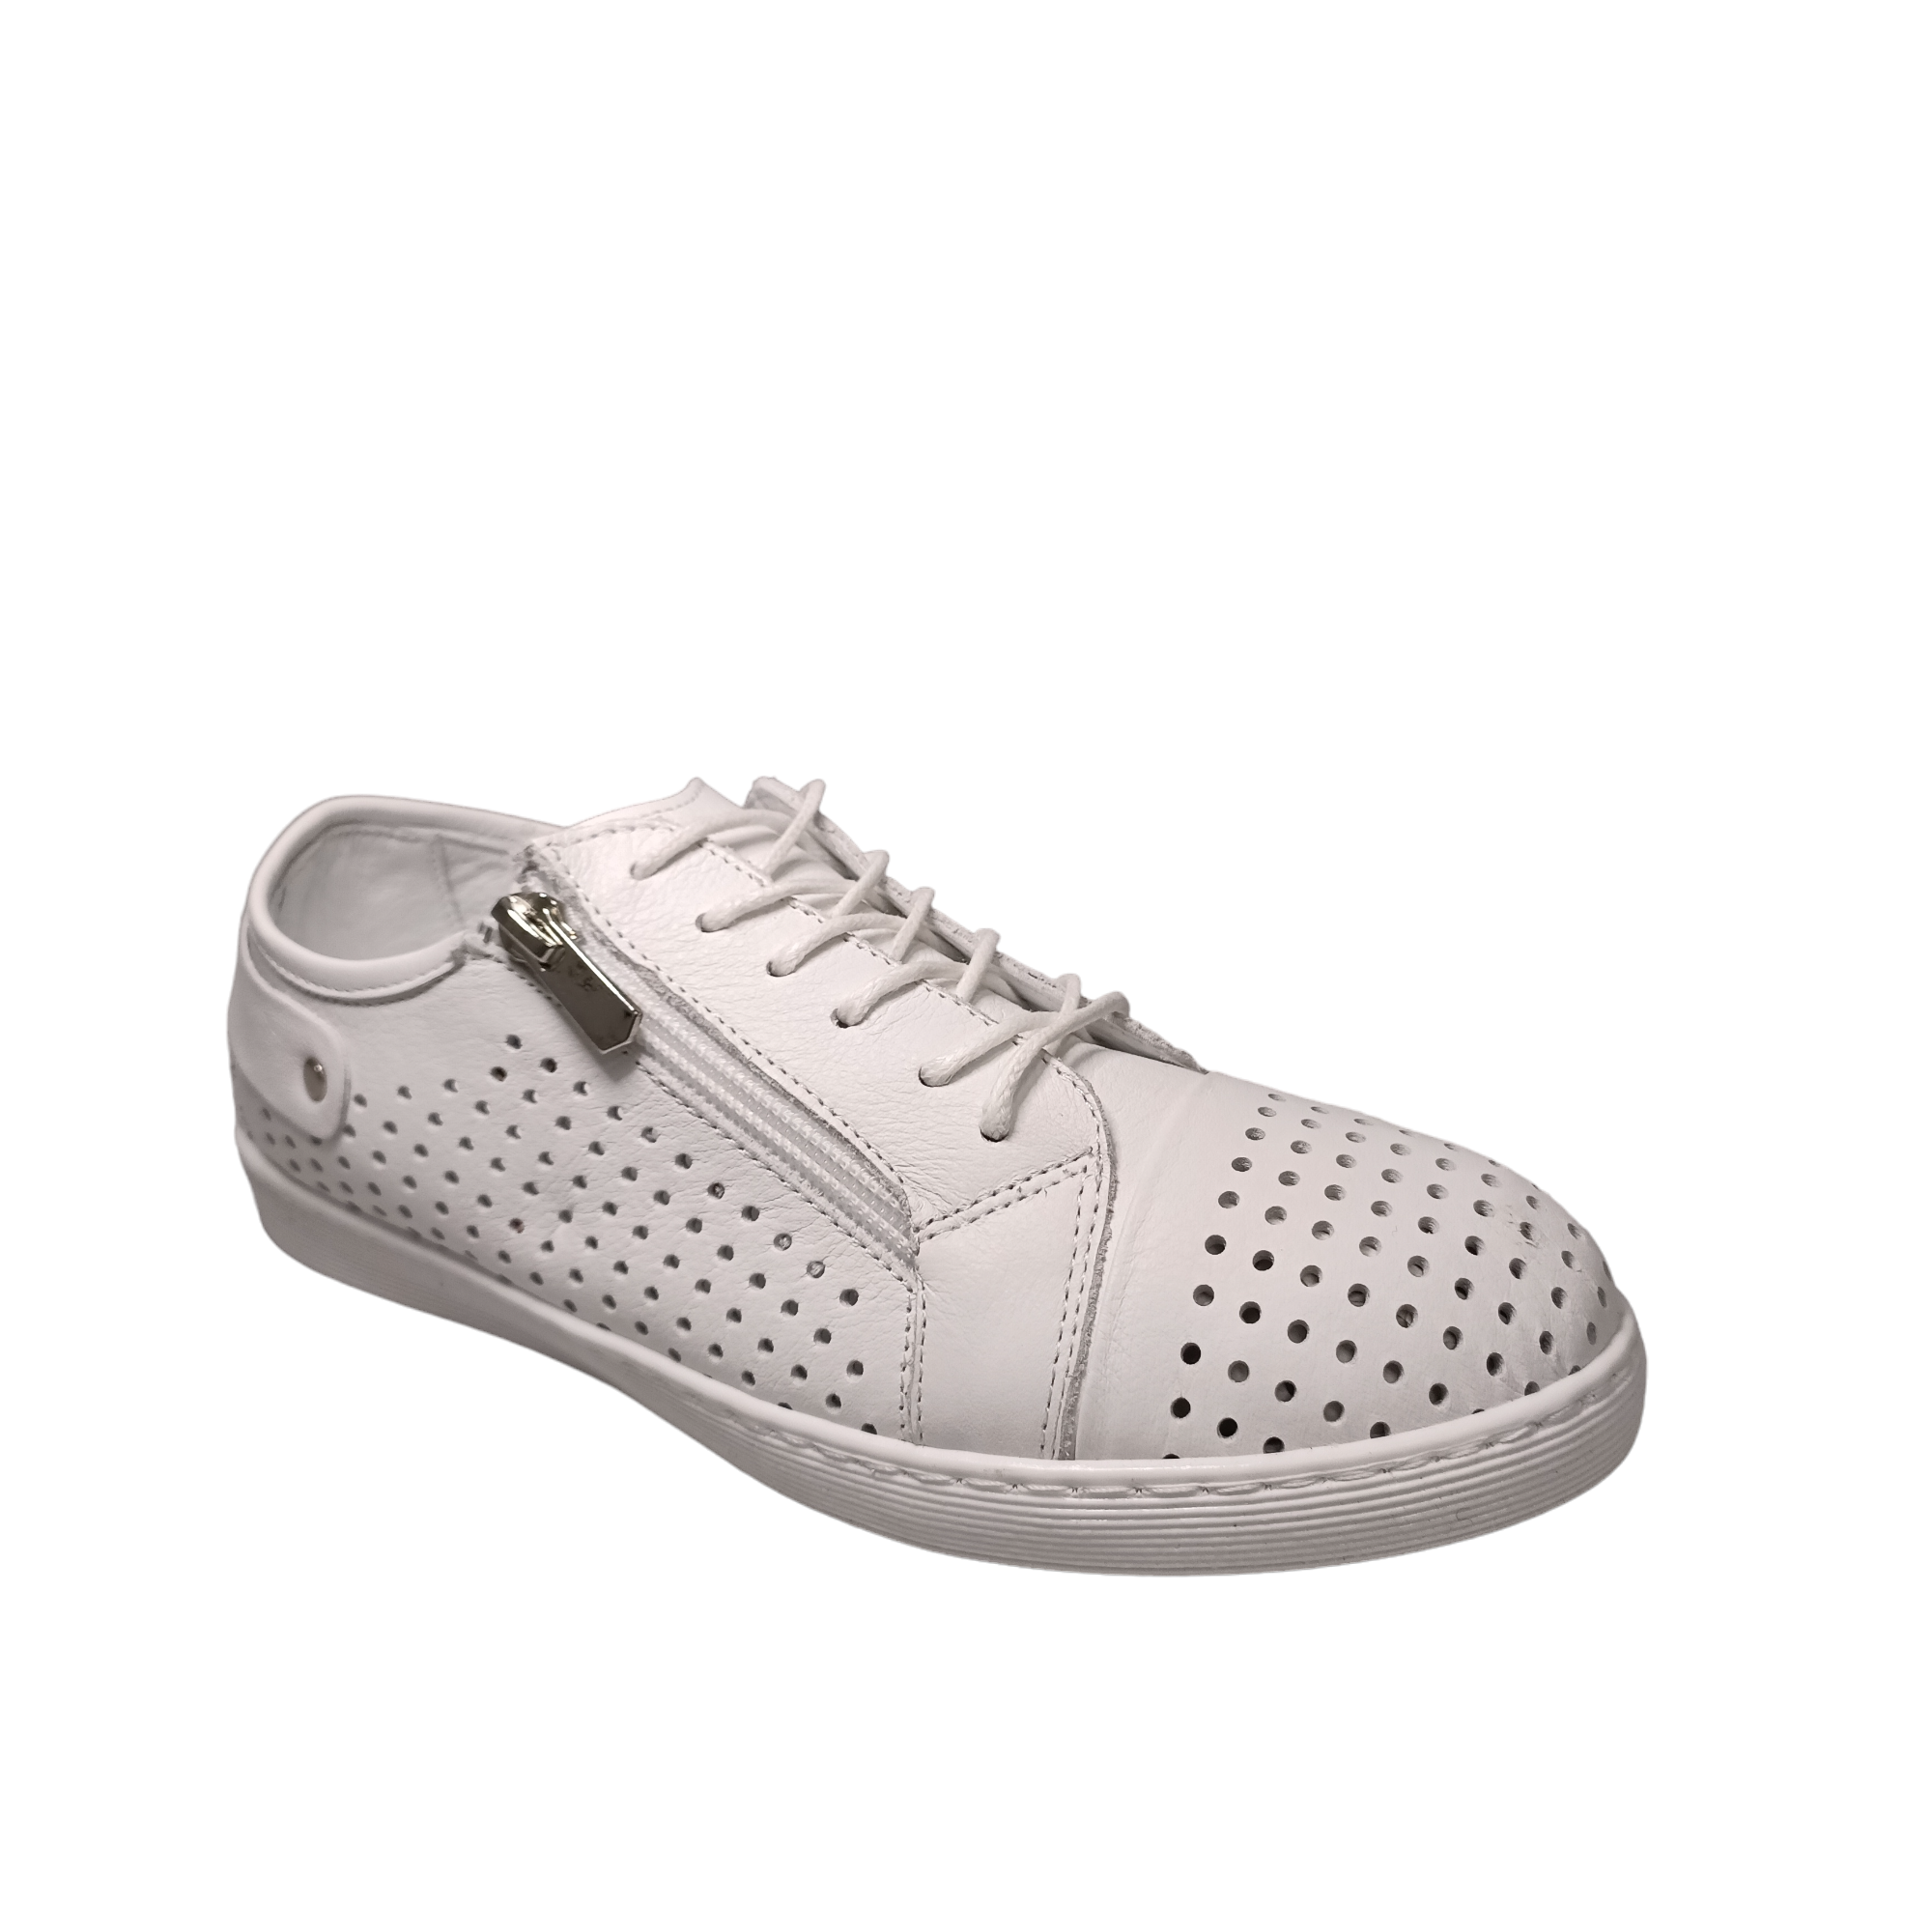 EG17 - shoe&amp;me - Cabello - Sneakers - Sneakers, Summer, Womens